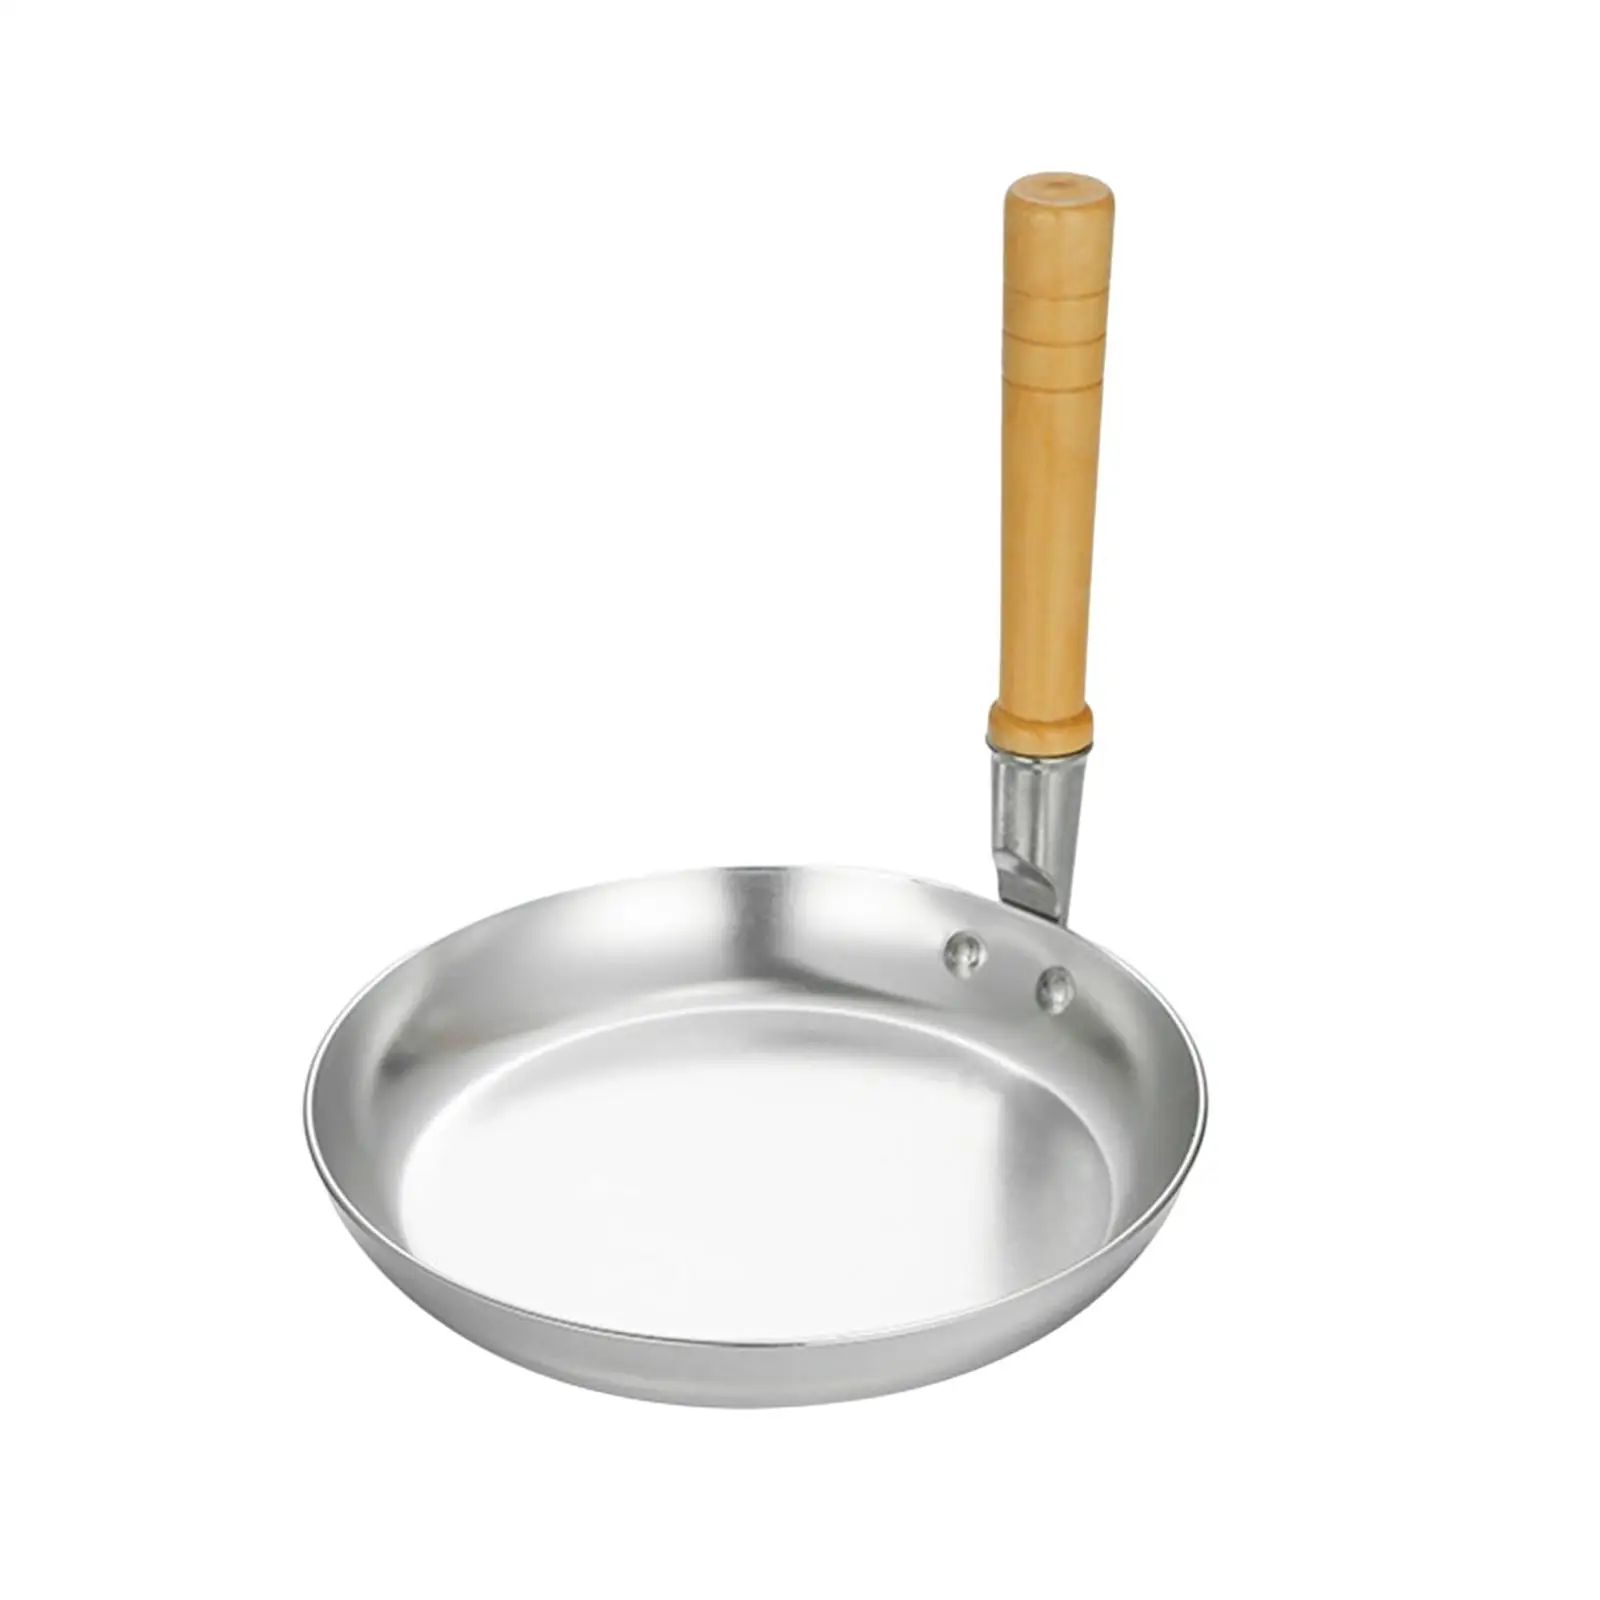 Standing frying pan wooden handle Japanese accessories manufacturer for cooking